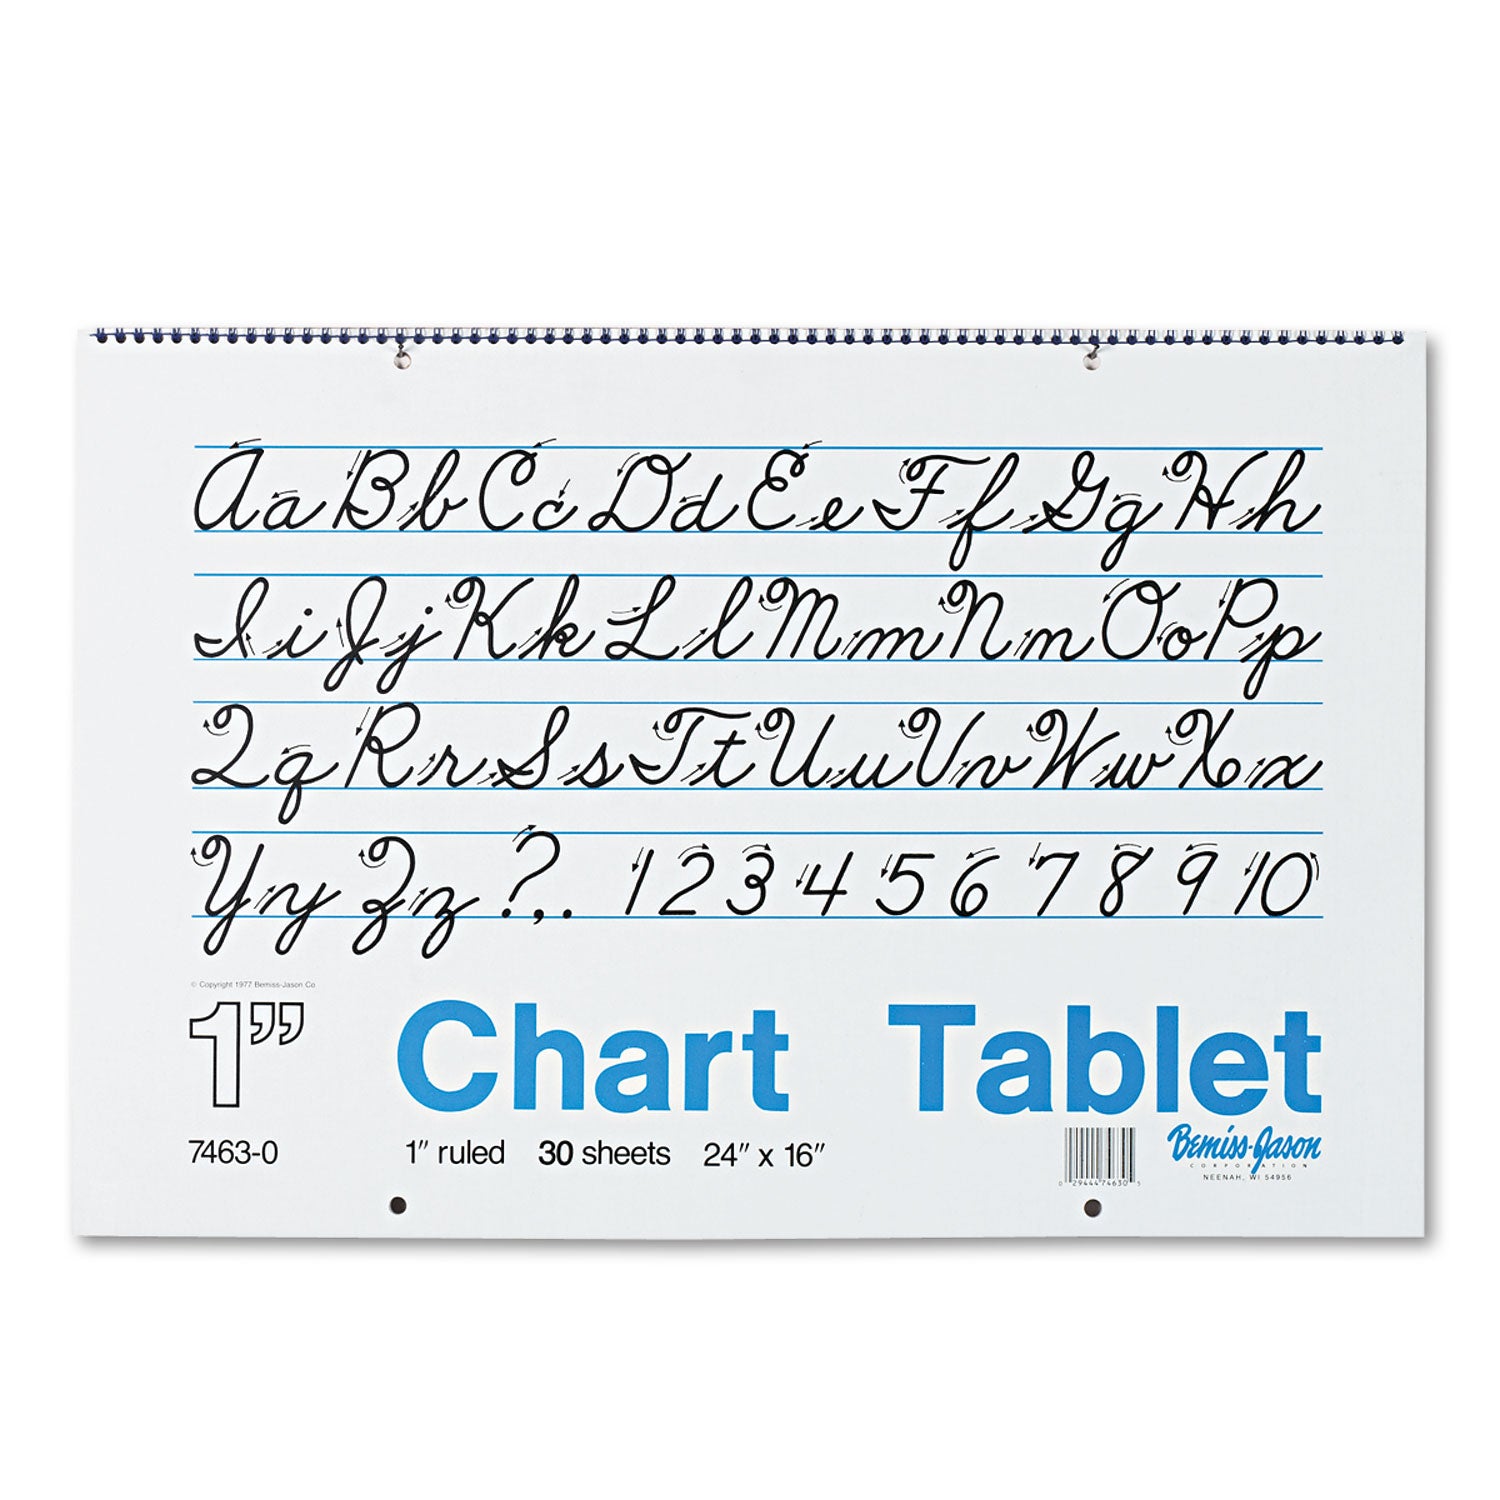 Chart Tablets, Presentation Format (1" Rule), 24 x 16, White, 30 Sheets - 